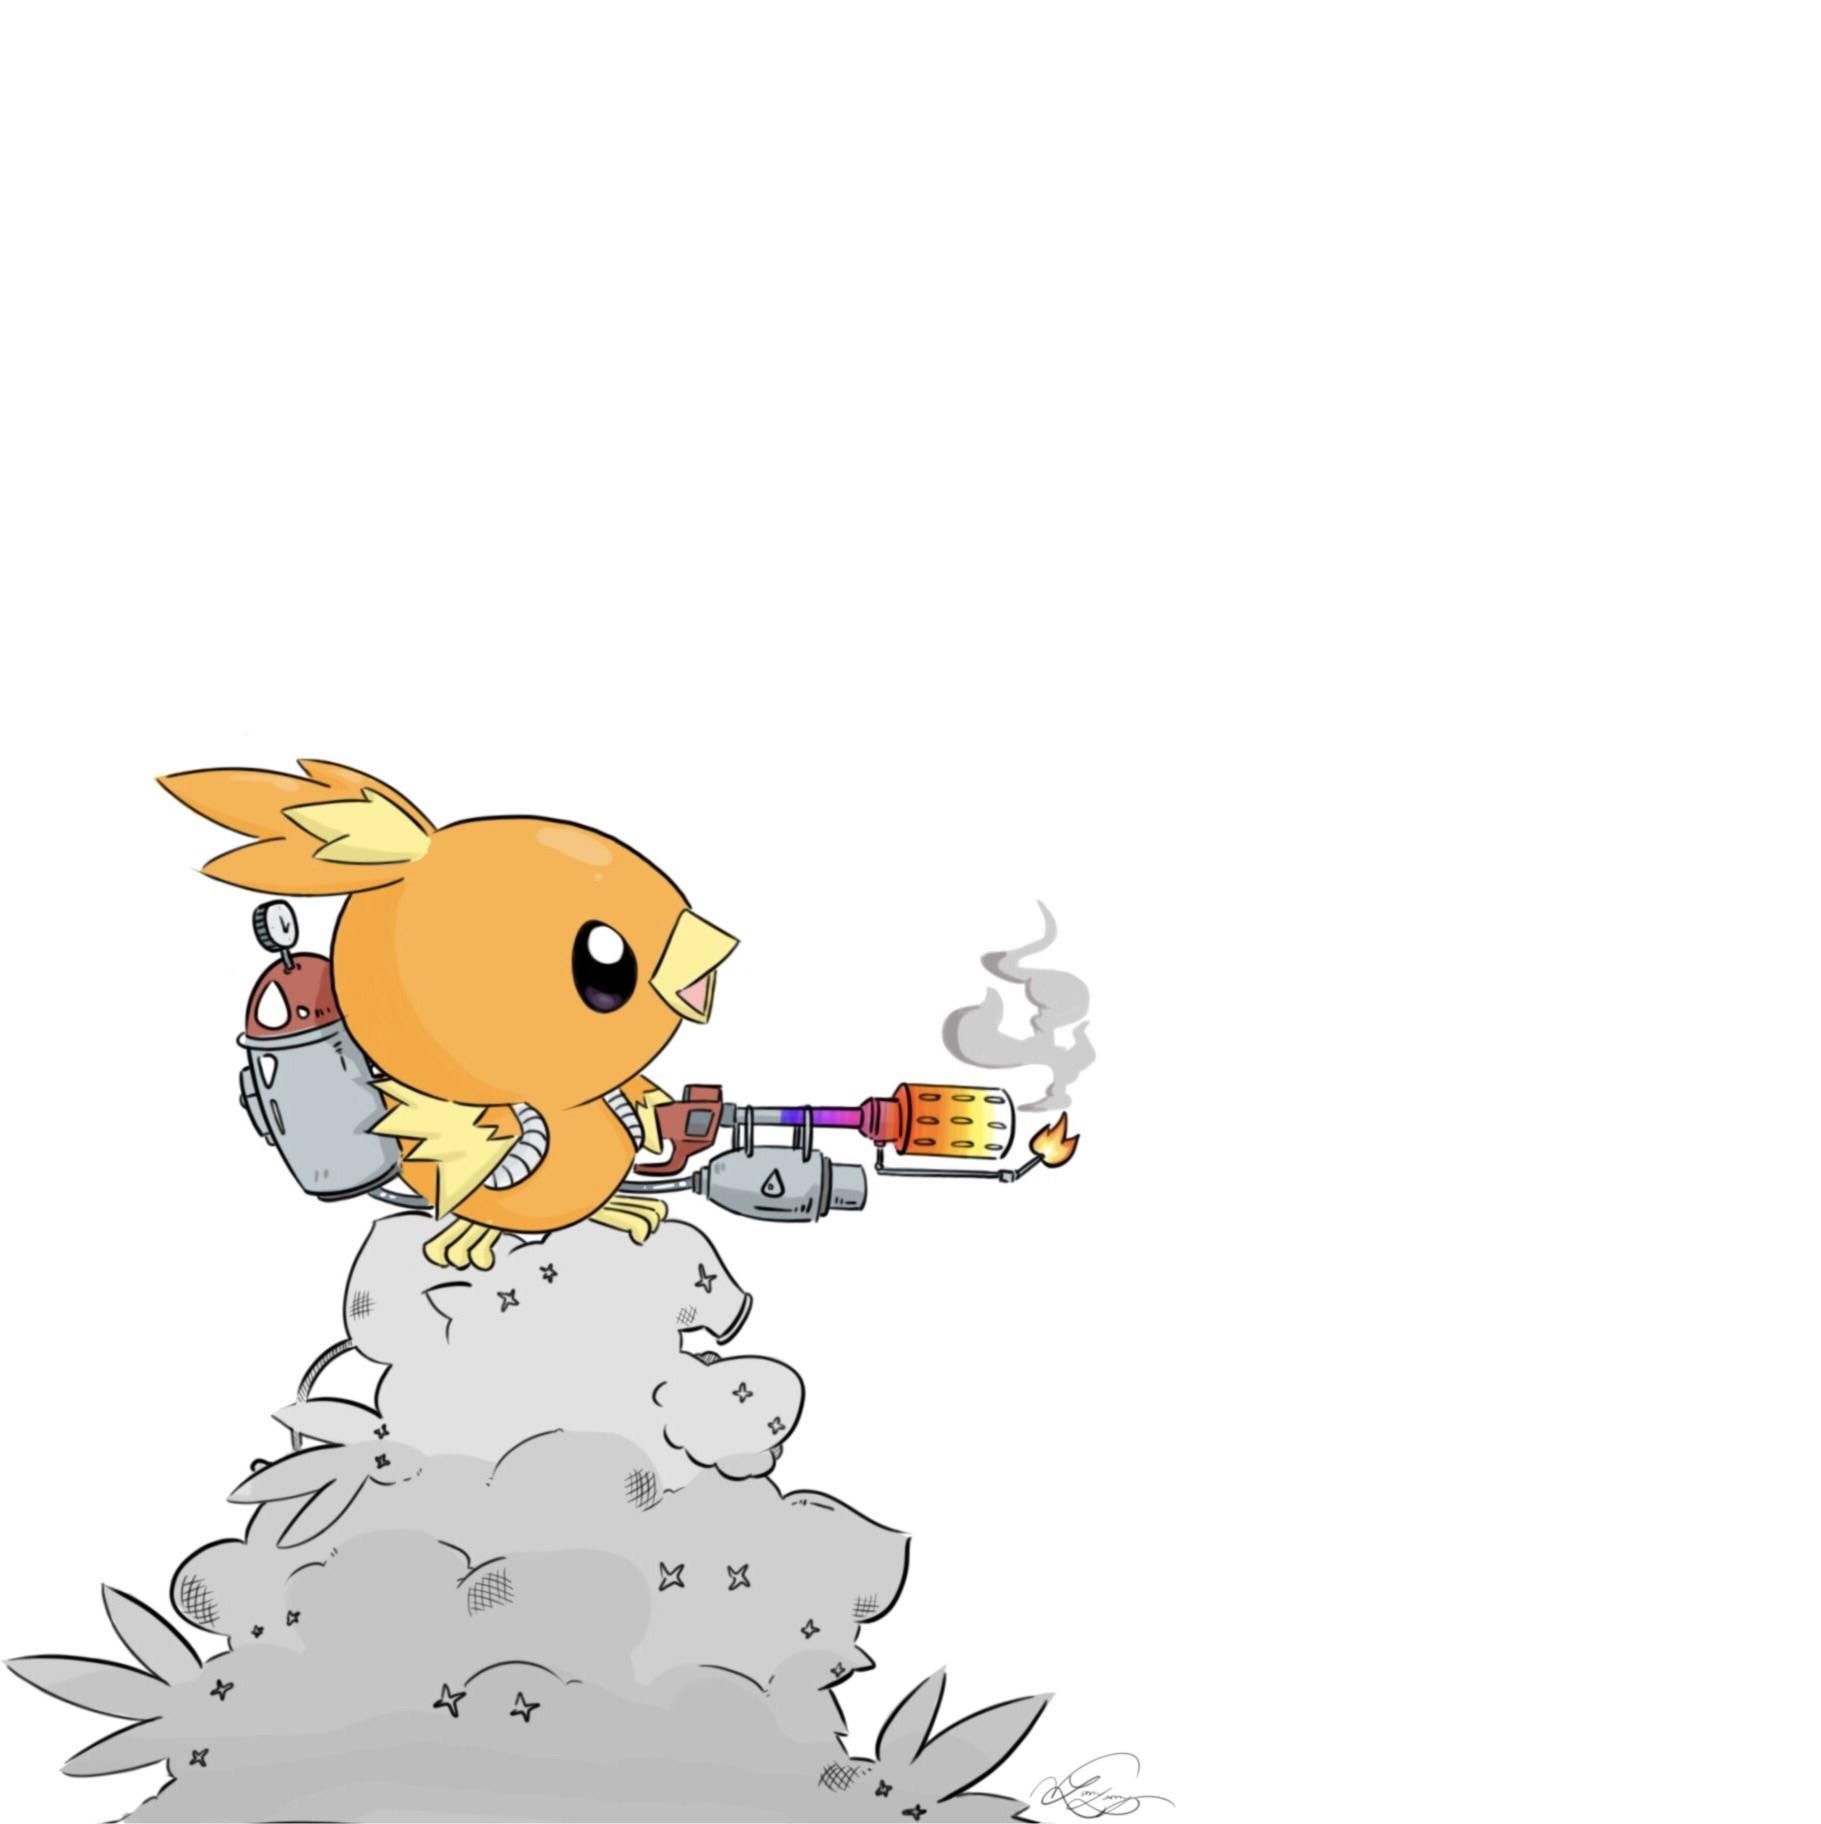 Torchic Hd Wallpapers